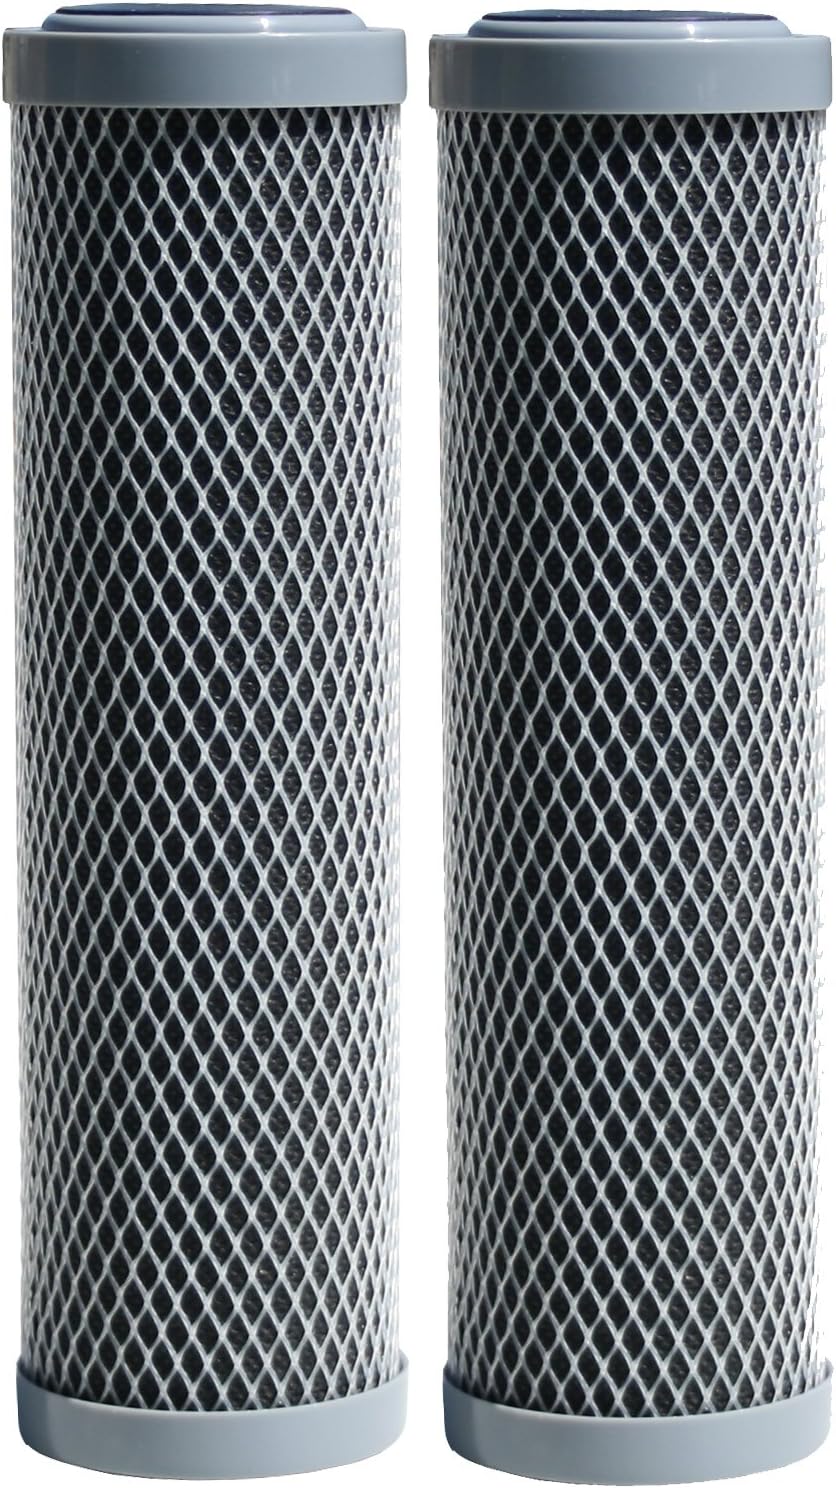 Watts Premier Chlorine & Sediment Reduction Replacement Filters - 2 Pack